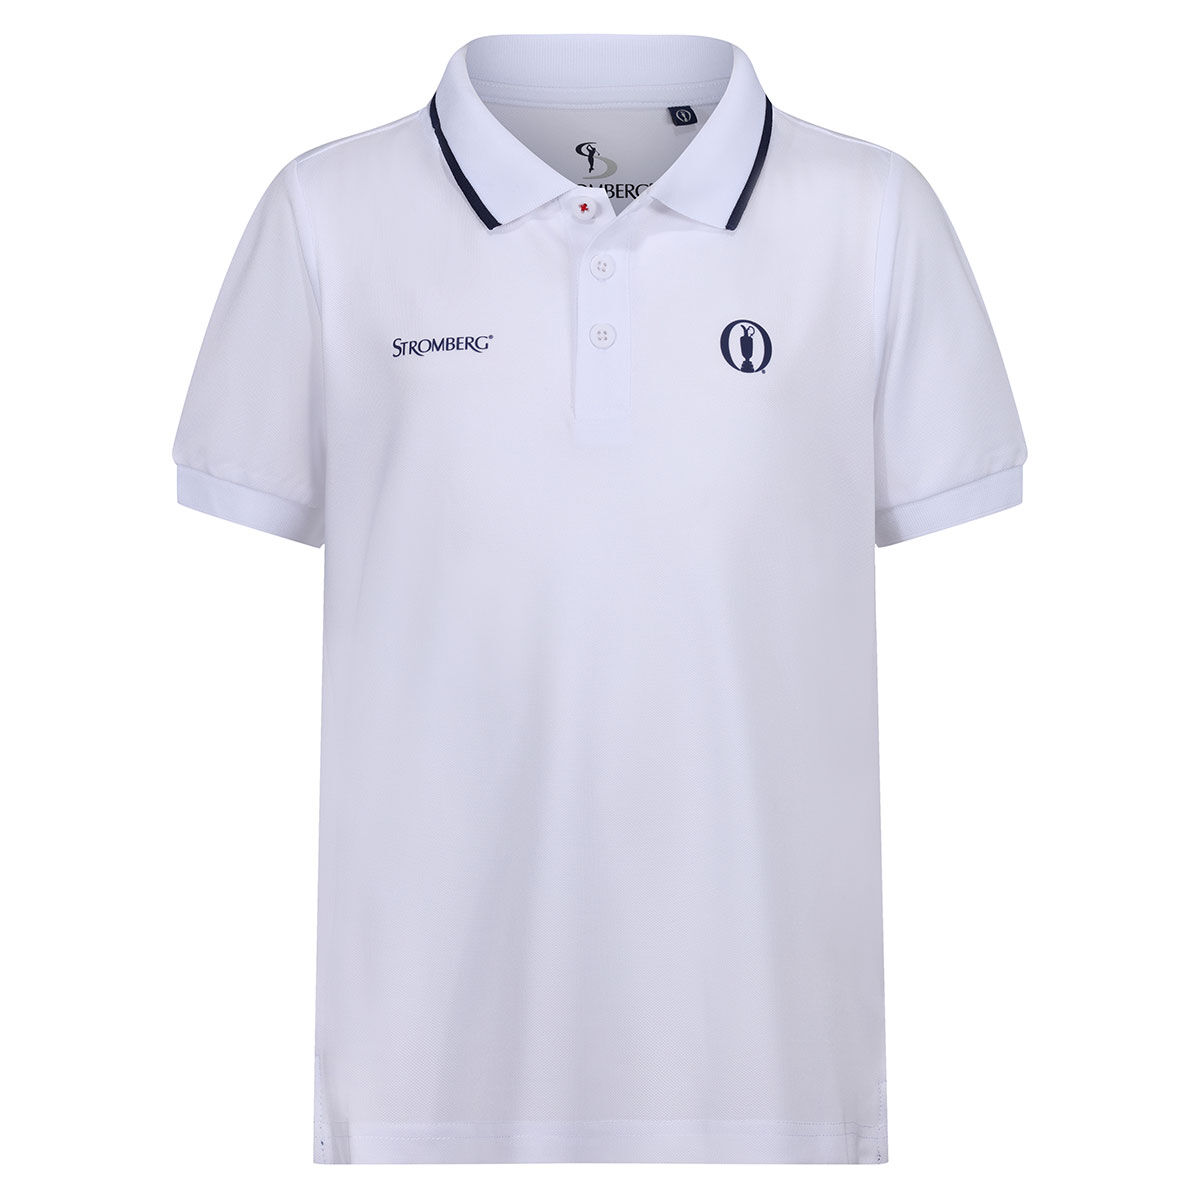 Stromberg Junior The Open Harbour Stretch Golf Polo Shirt, Unisex, Optic white, 13-14 years | American Golf